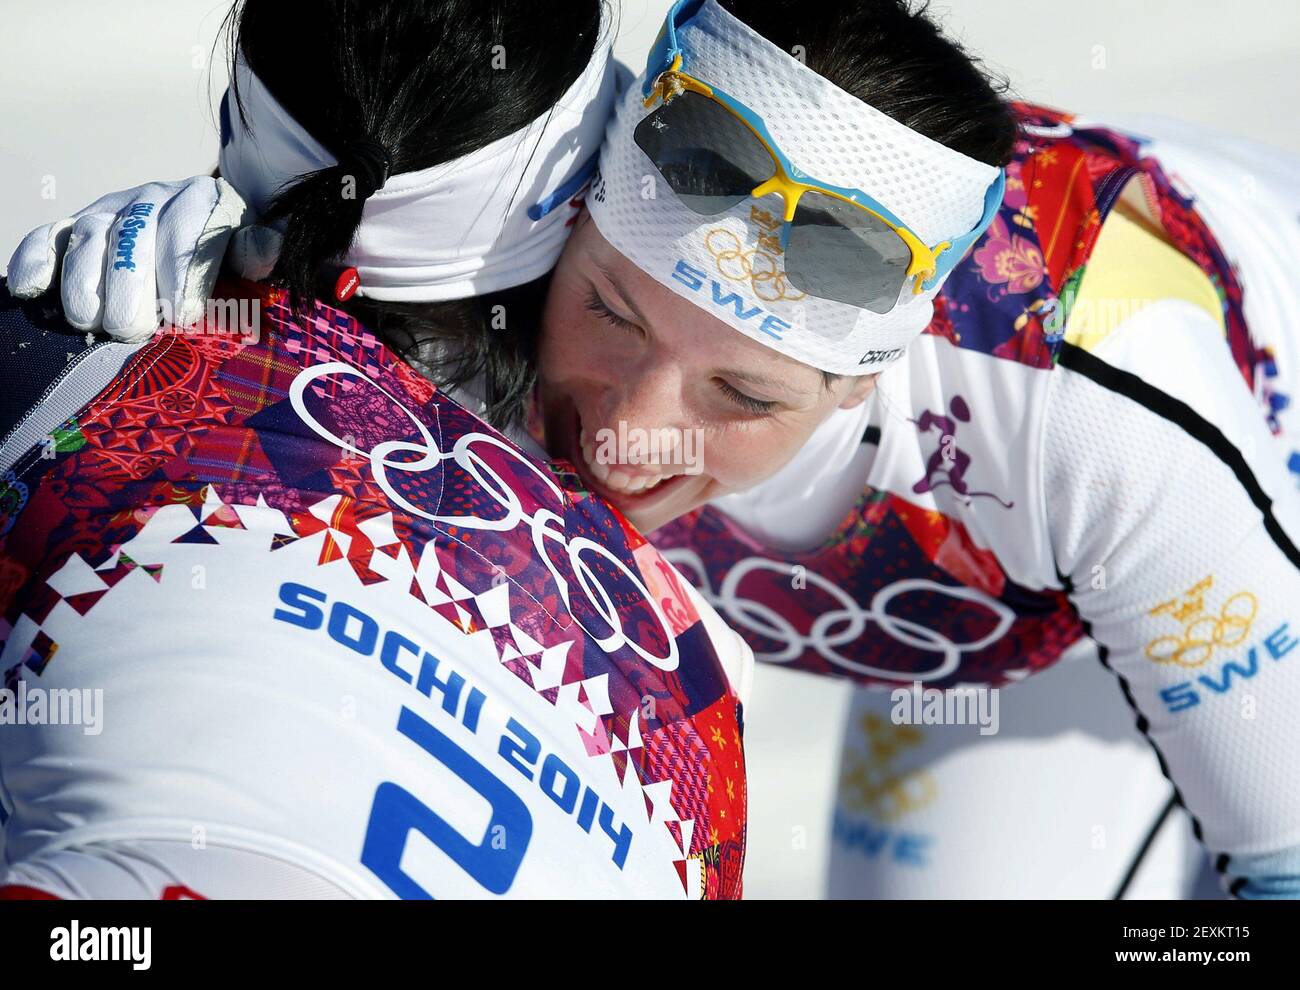 Marit Bjoergen of Norway, right, gets a hug from Charlotte Kalla of Sweden as she celebrates winning gold in the Women's 7.5m + 7.5m Skiathlon in the 2014 Winter Olympics in Sochi, Russia. (Photo by Carlos Gonzalez/Minneapolis Star Triubne/MCT/Sipa USA) Stock Photo